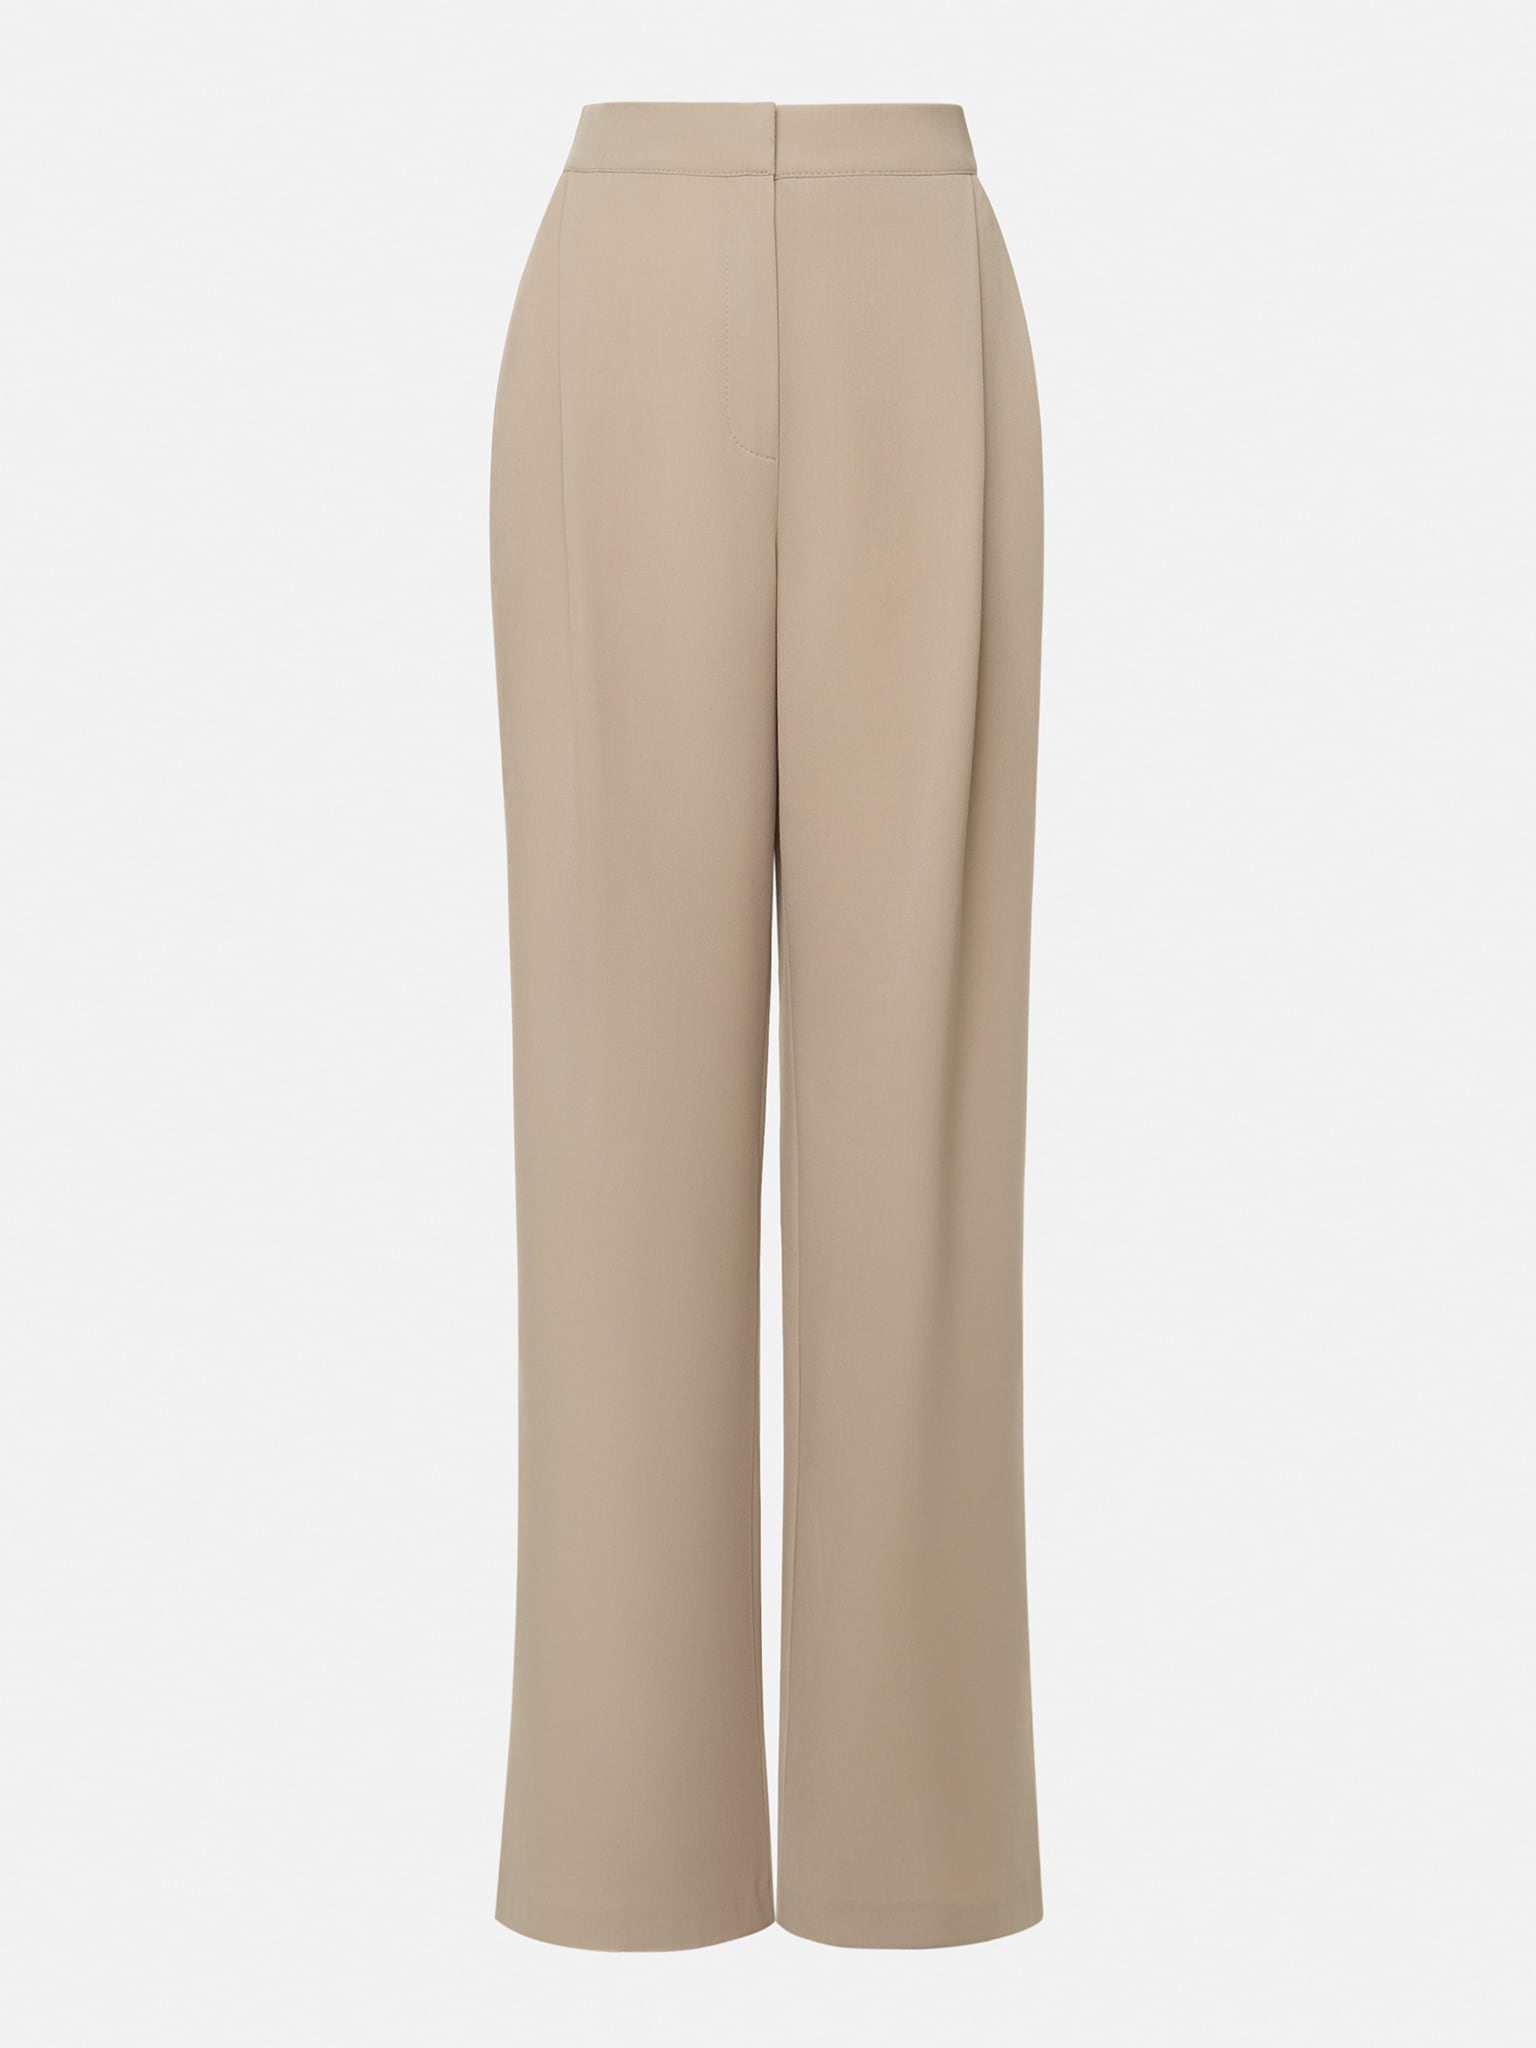 Pleated flowing palazzo pants :: LICHI - Online fashion store